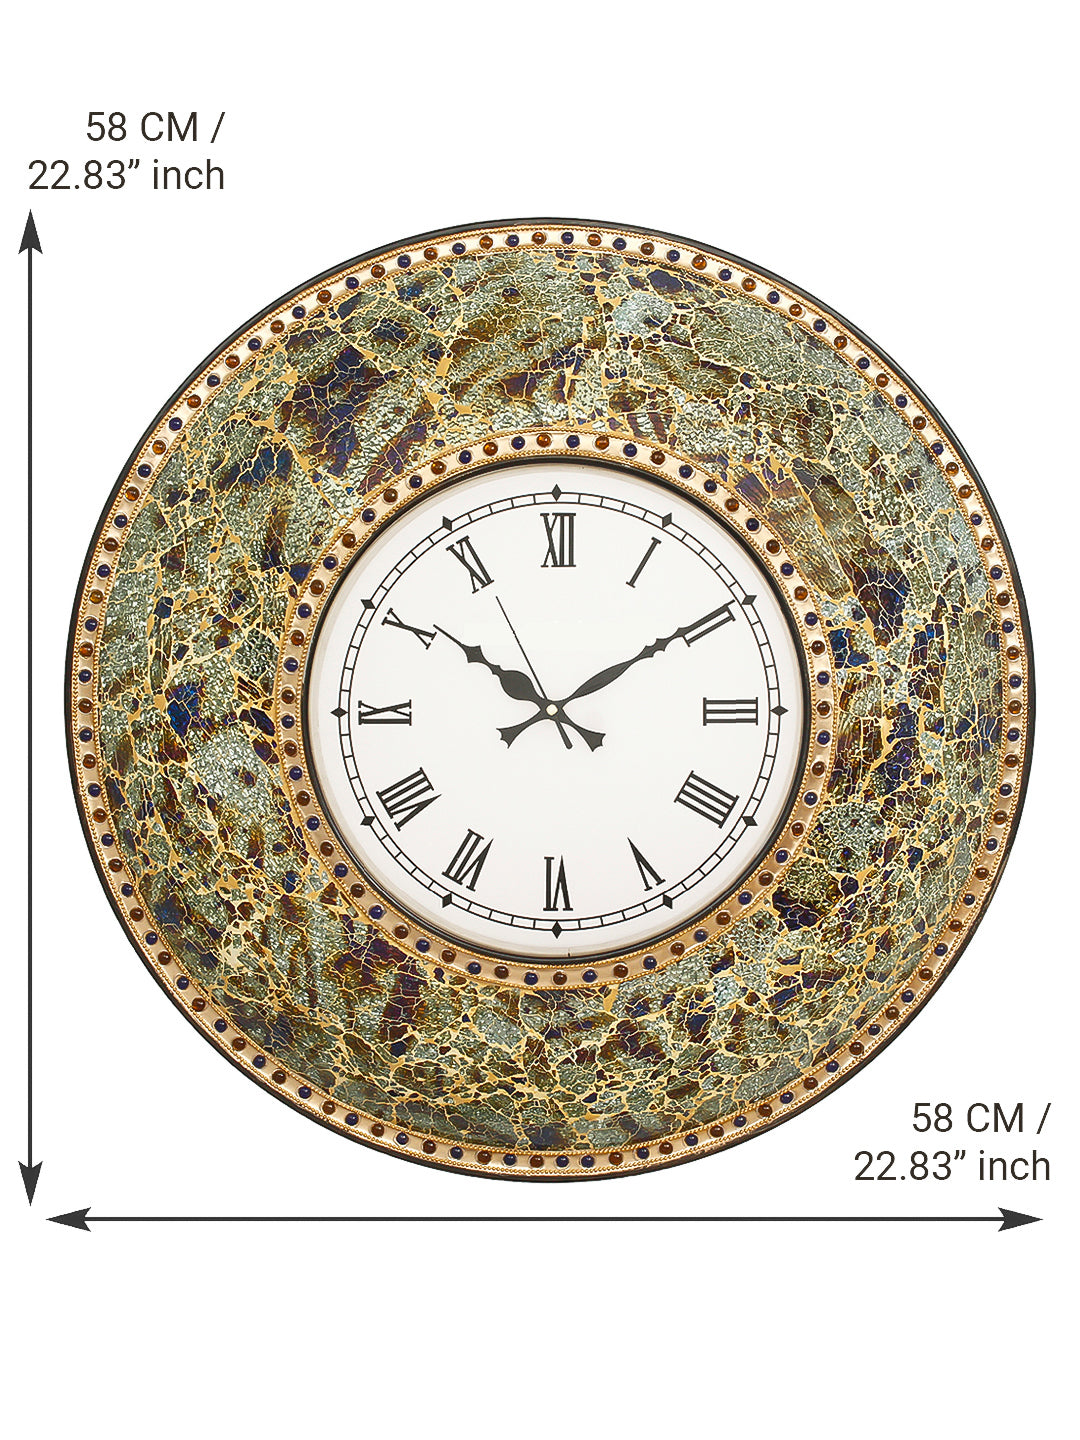 Multicolor Mosaic Glass & Wood Round Handcrafted Analog Ethnic Luxury Roman Numeral Wall Clock 3